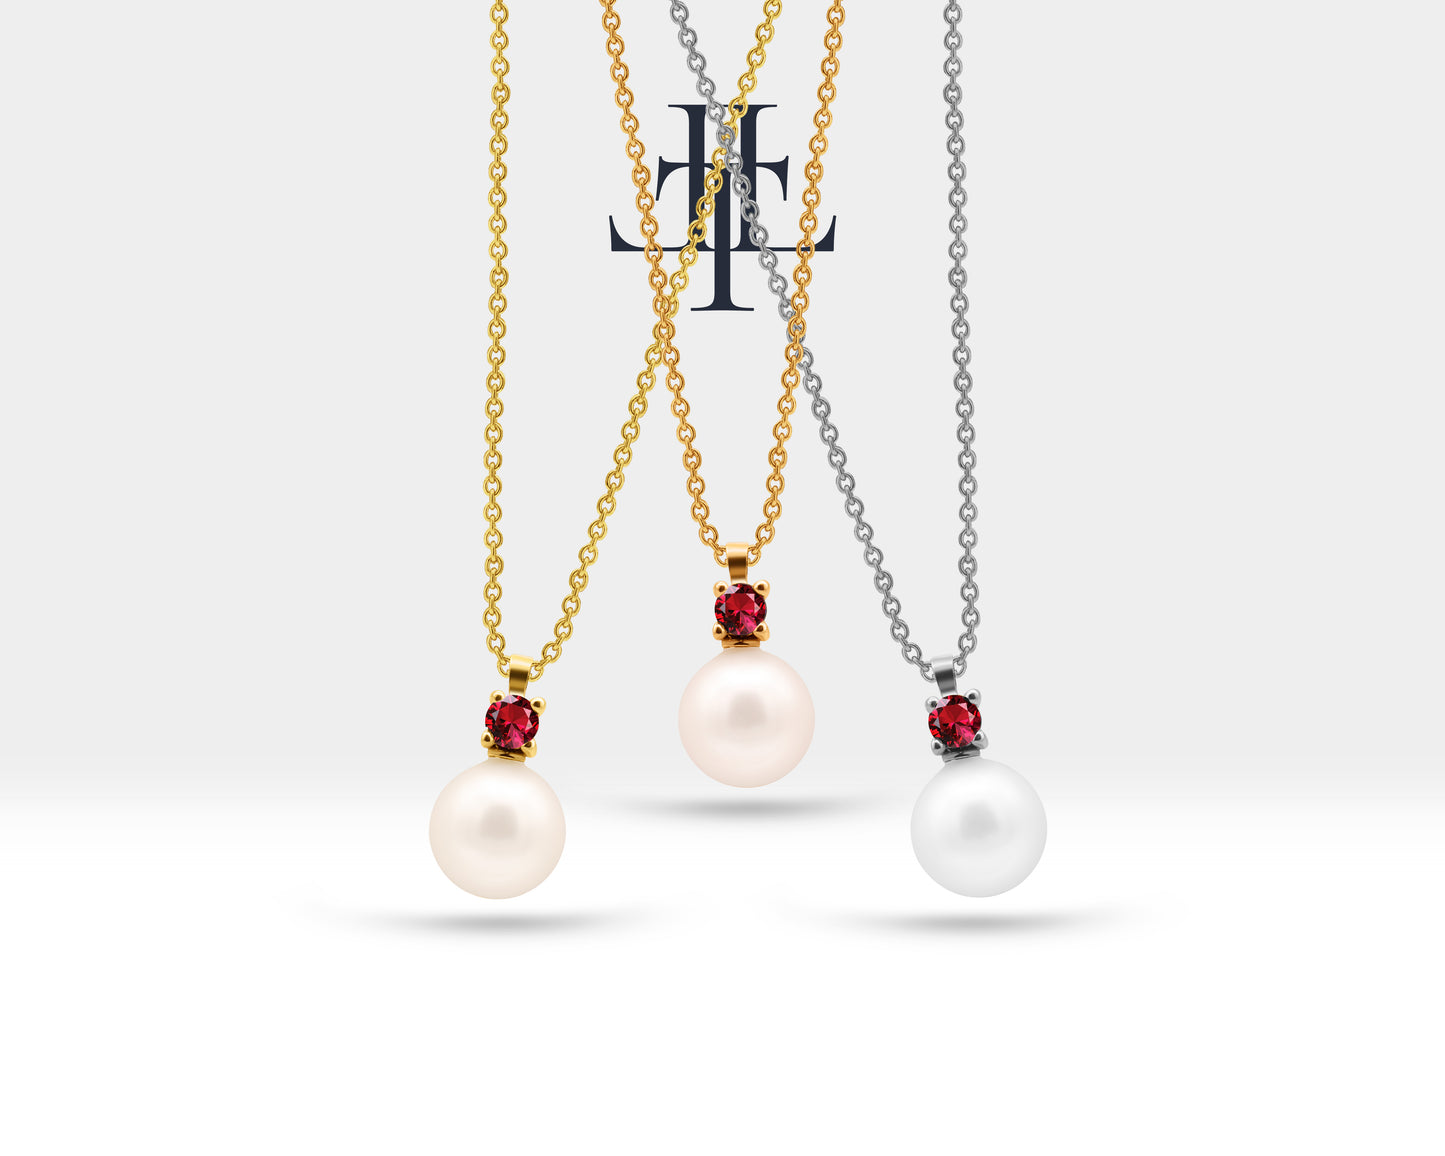 Bridal Jewelry Set of Pearl Earrings and Necklace Set in 14K Solid Gold Jewelry Set with Ruby and Natural Pearl Stud Earrings | LS00014PR